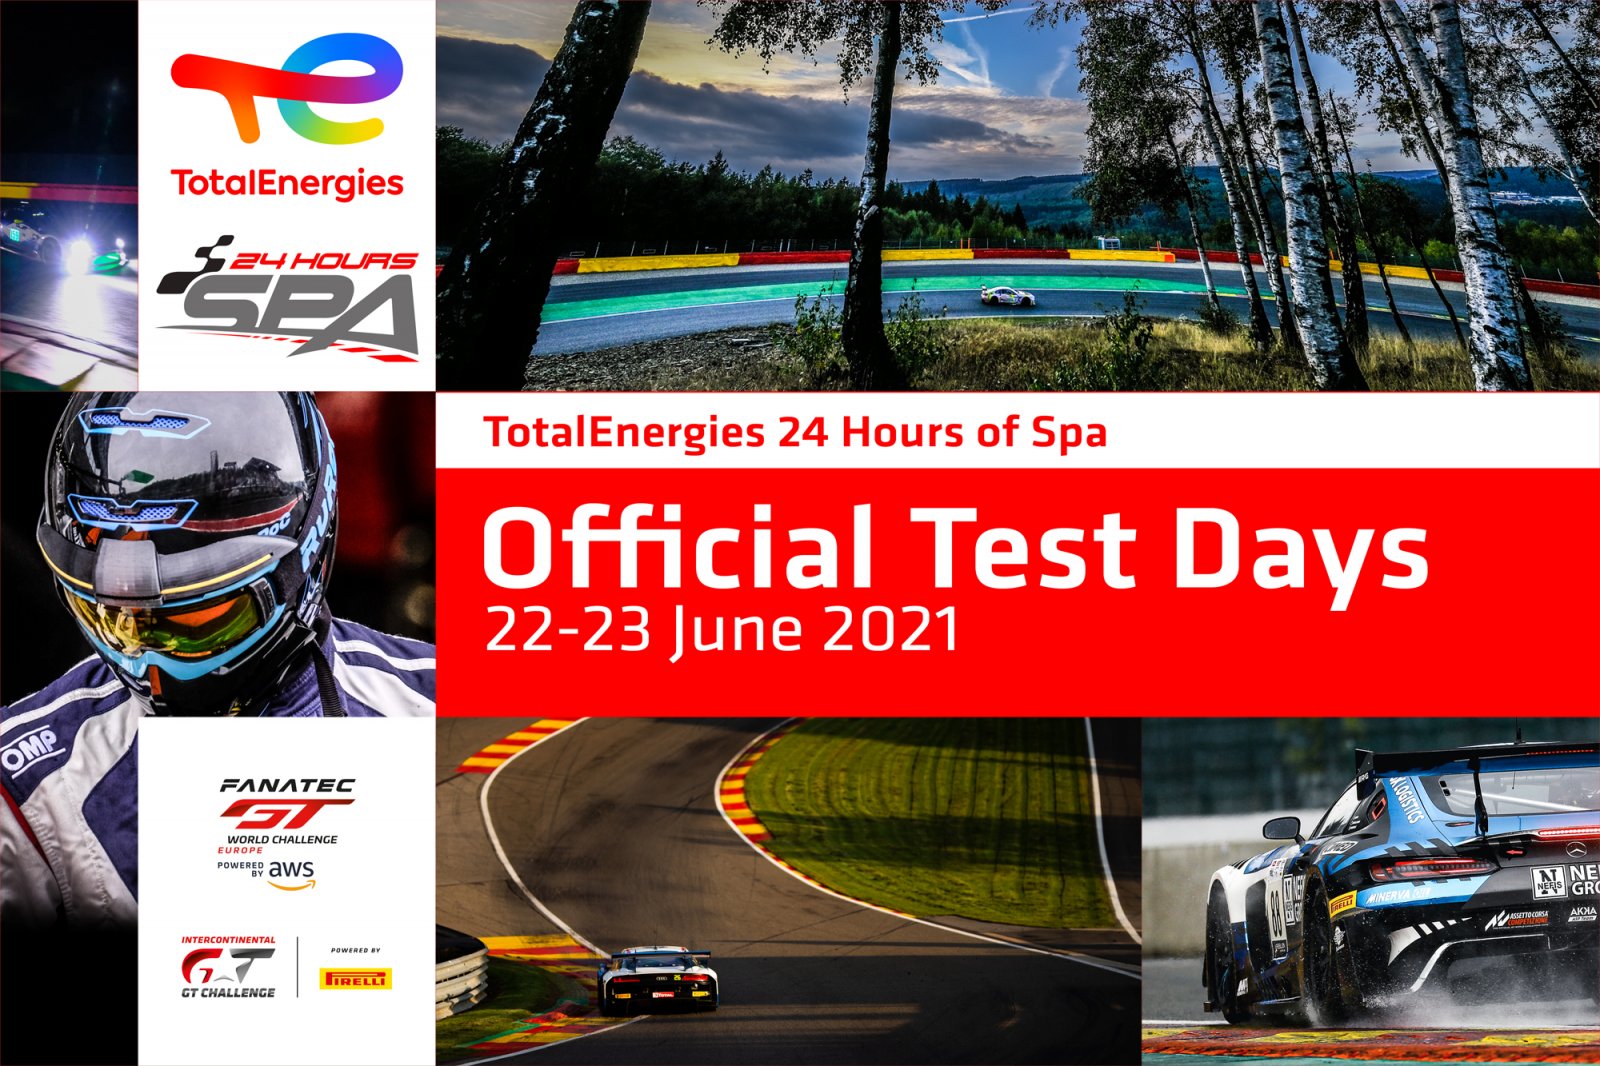 TotalEnergies 24 Hours of Spa preparations enter crucial phase at official test days